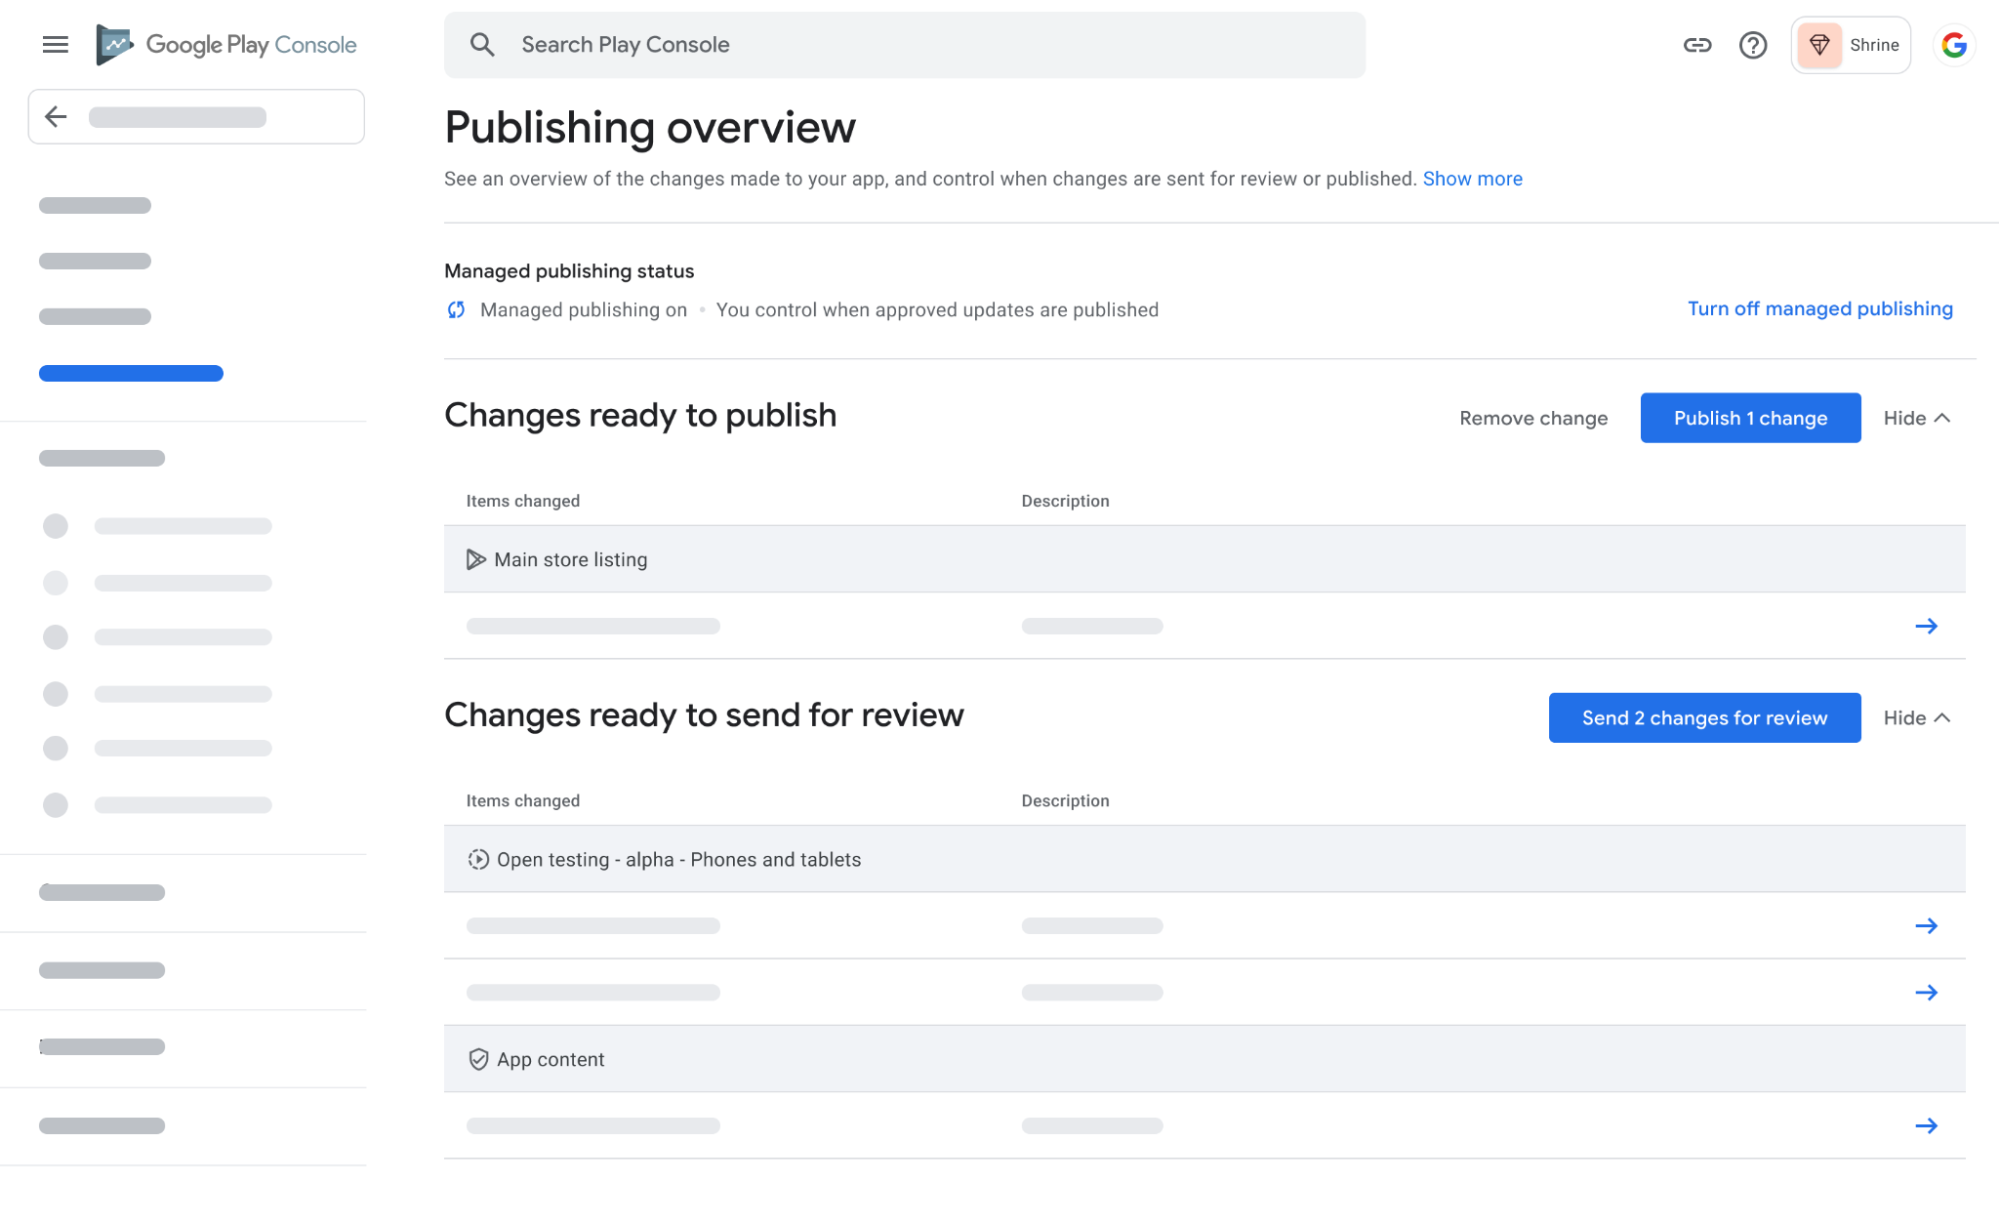 Publishing overview section on Google Play Console